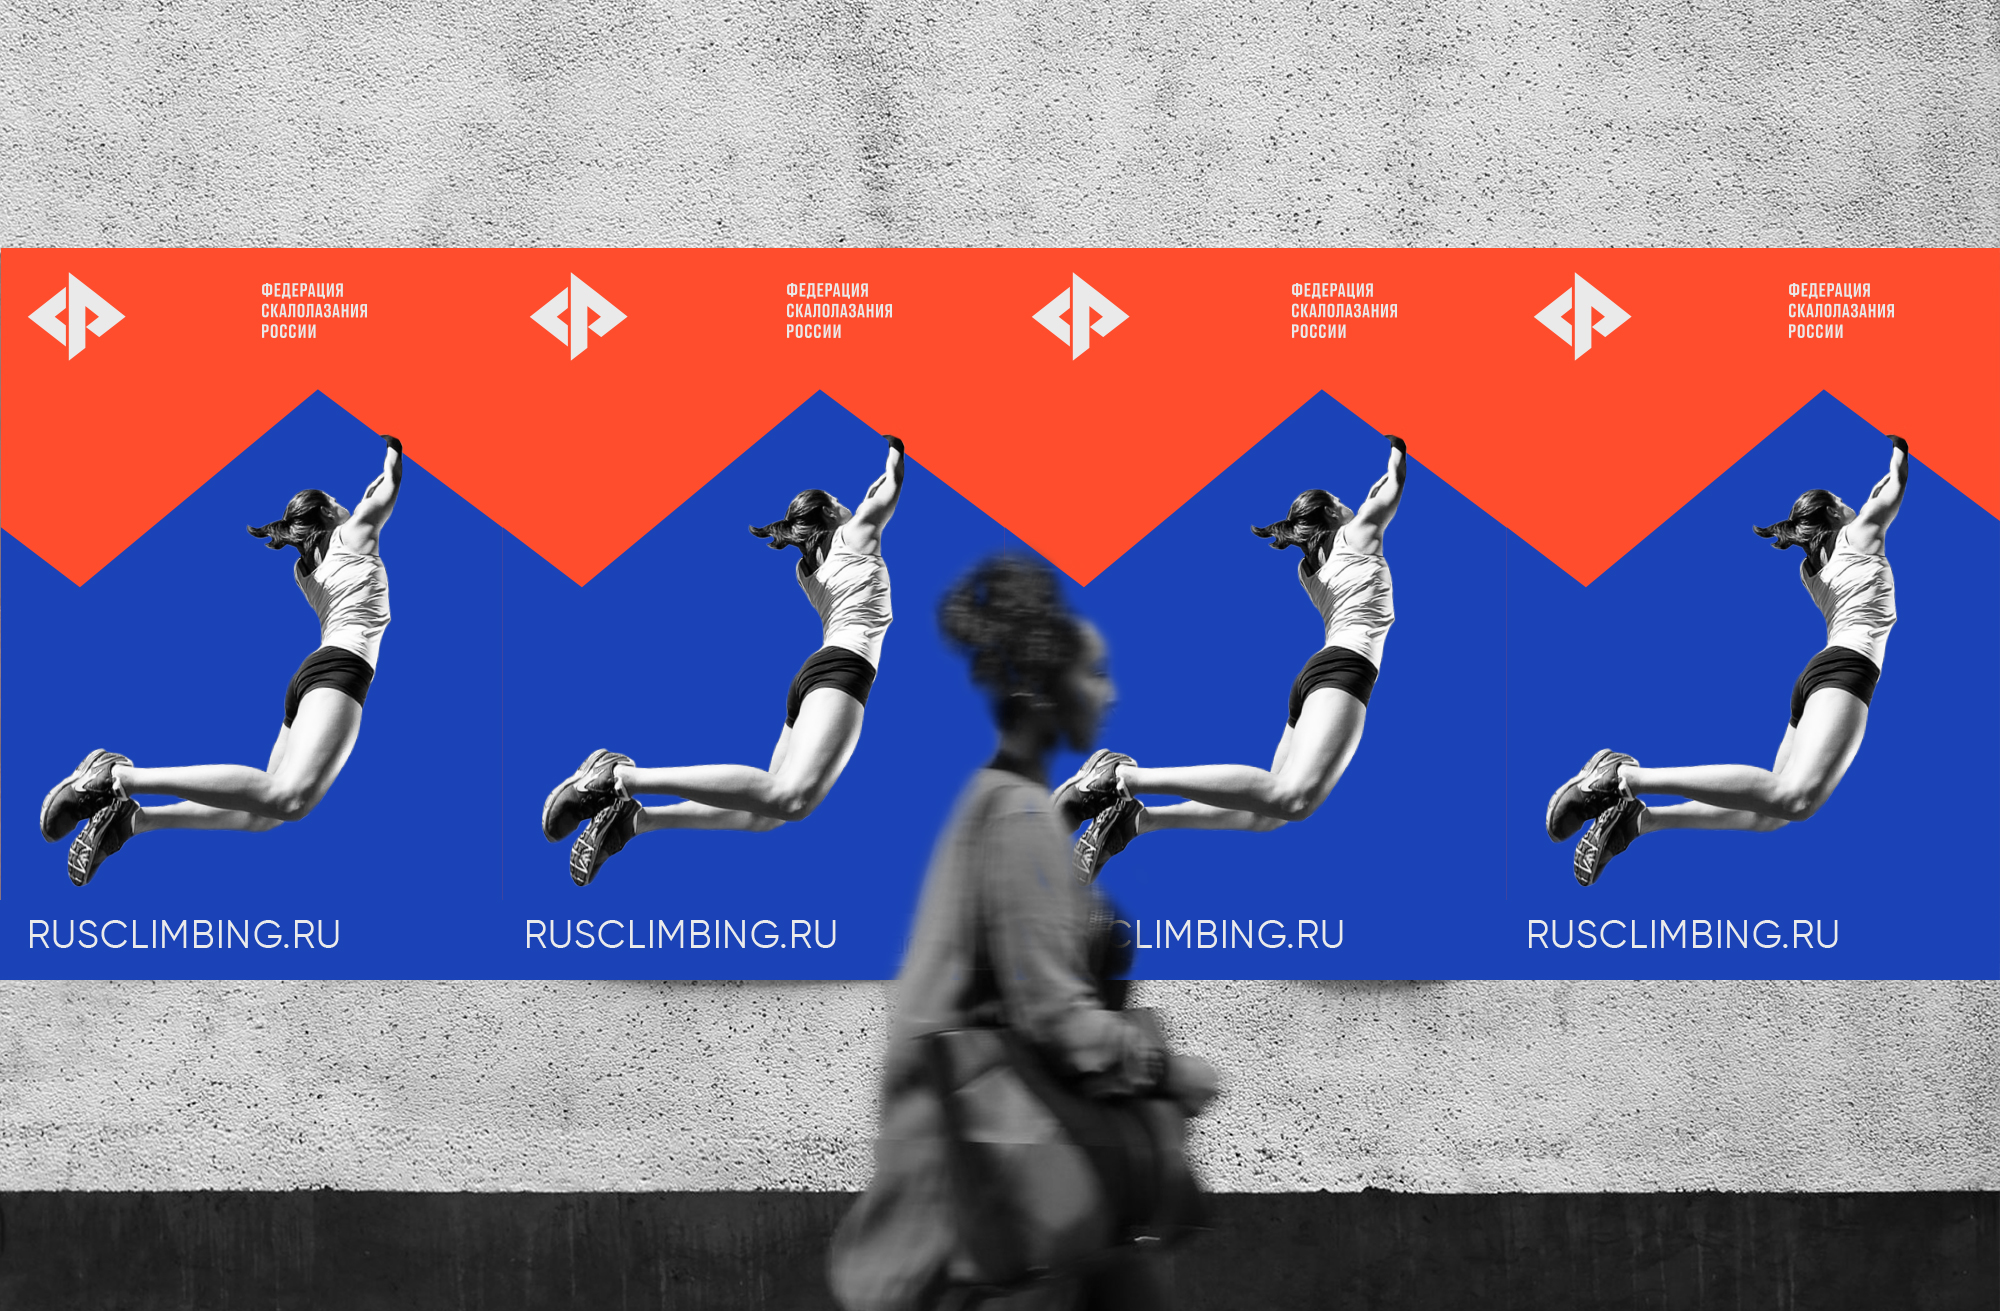 Brand Redesign for the Climbing Federation of Russia by Veronika Levitskaya